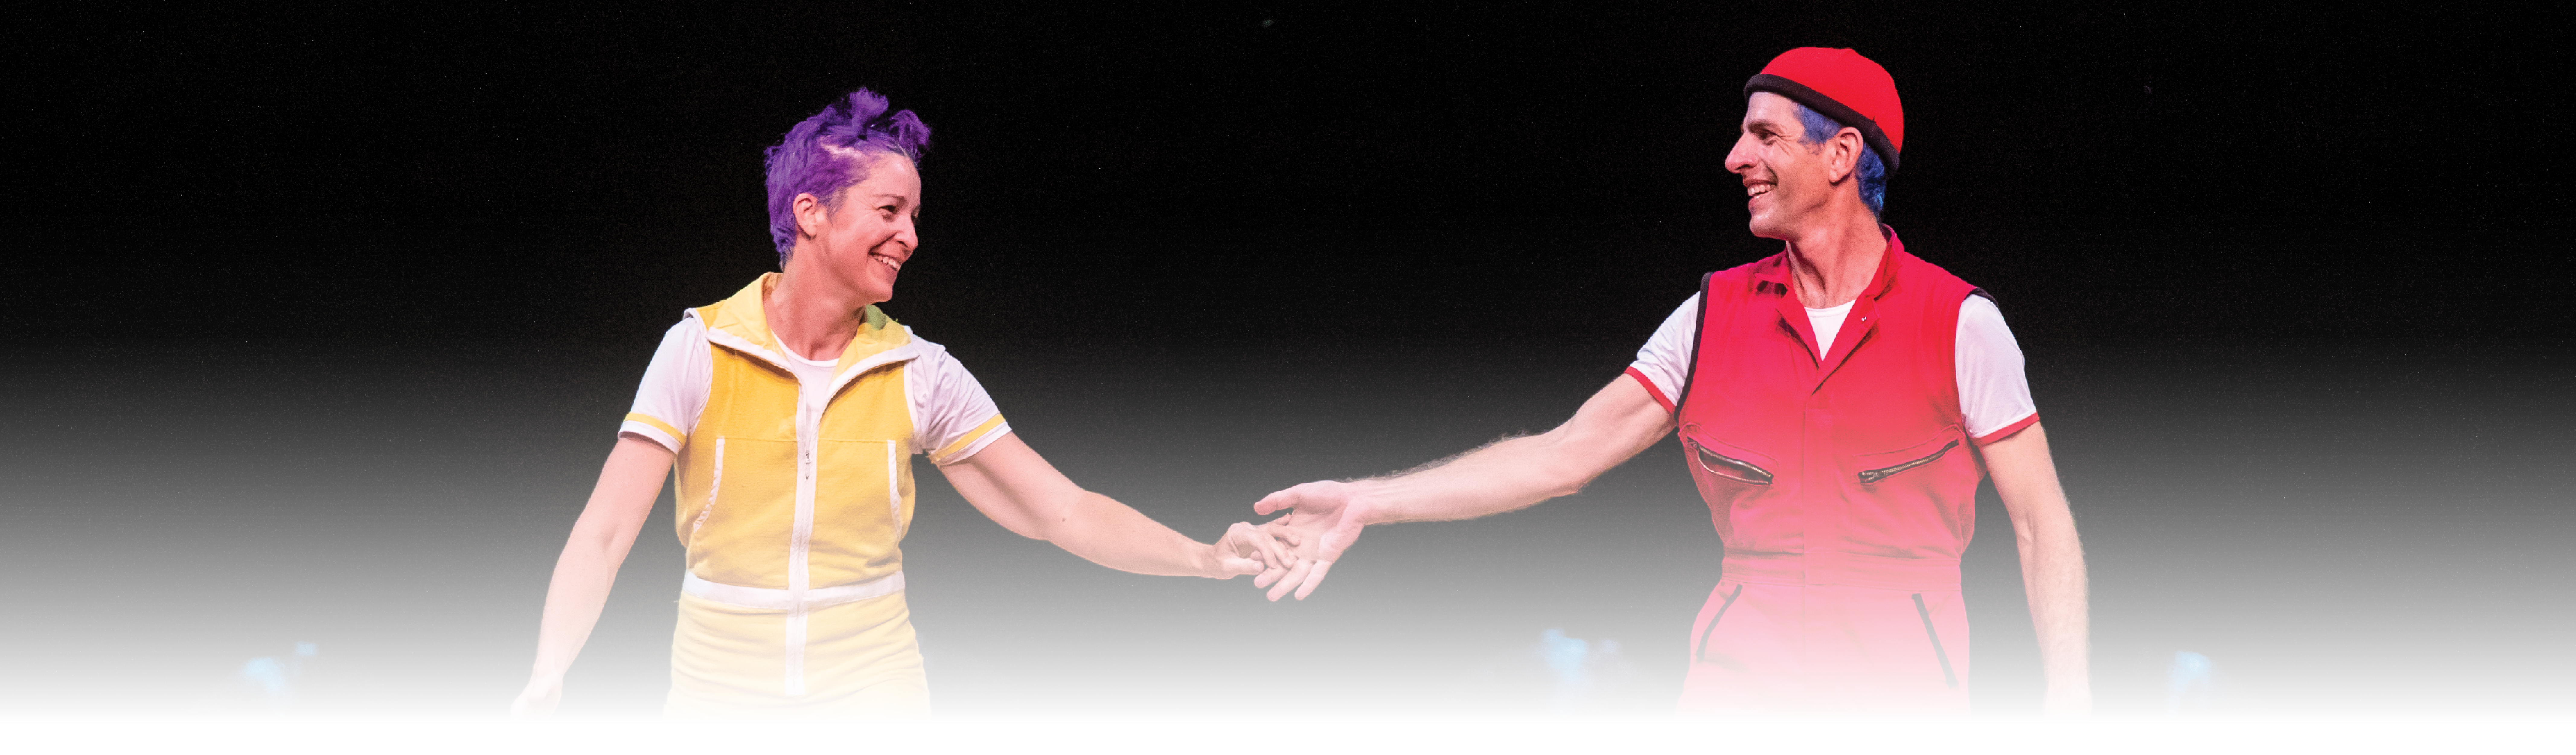 A performer in yellow holds hands with a performer in red